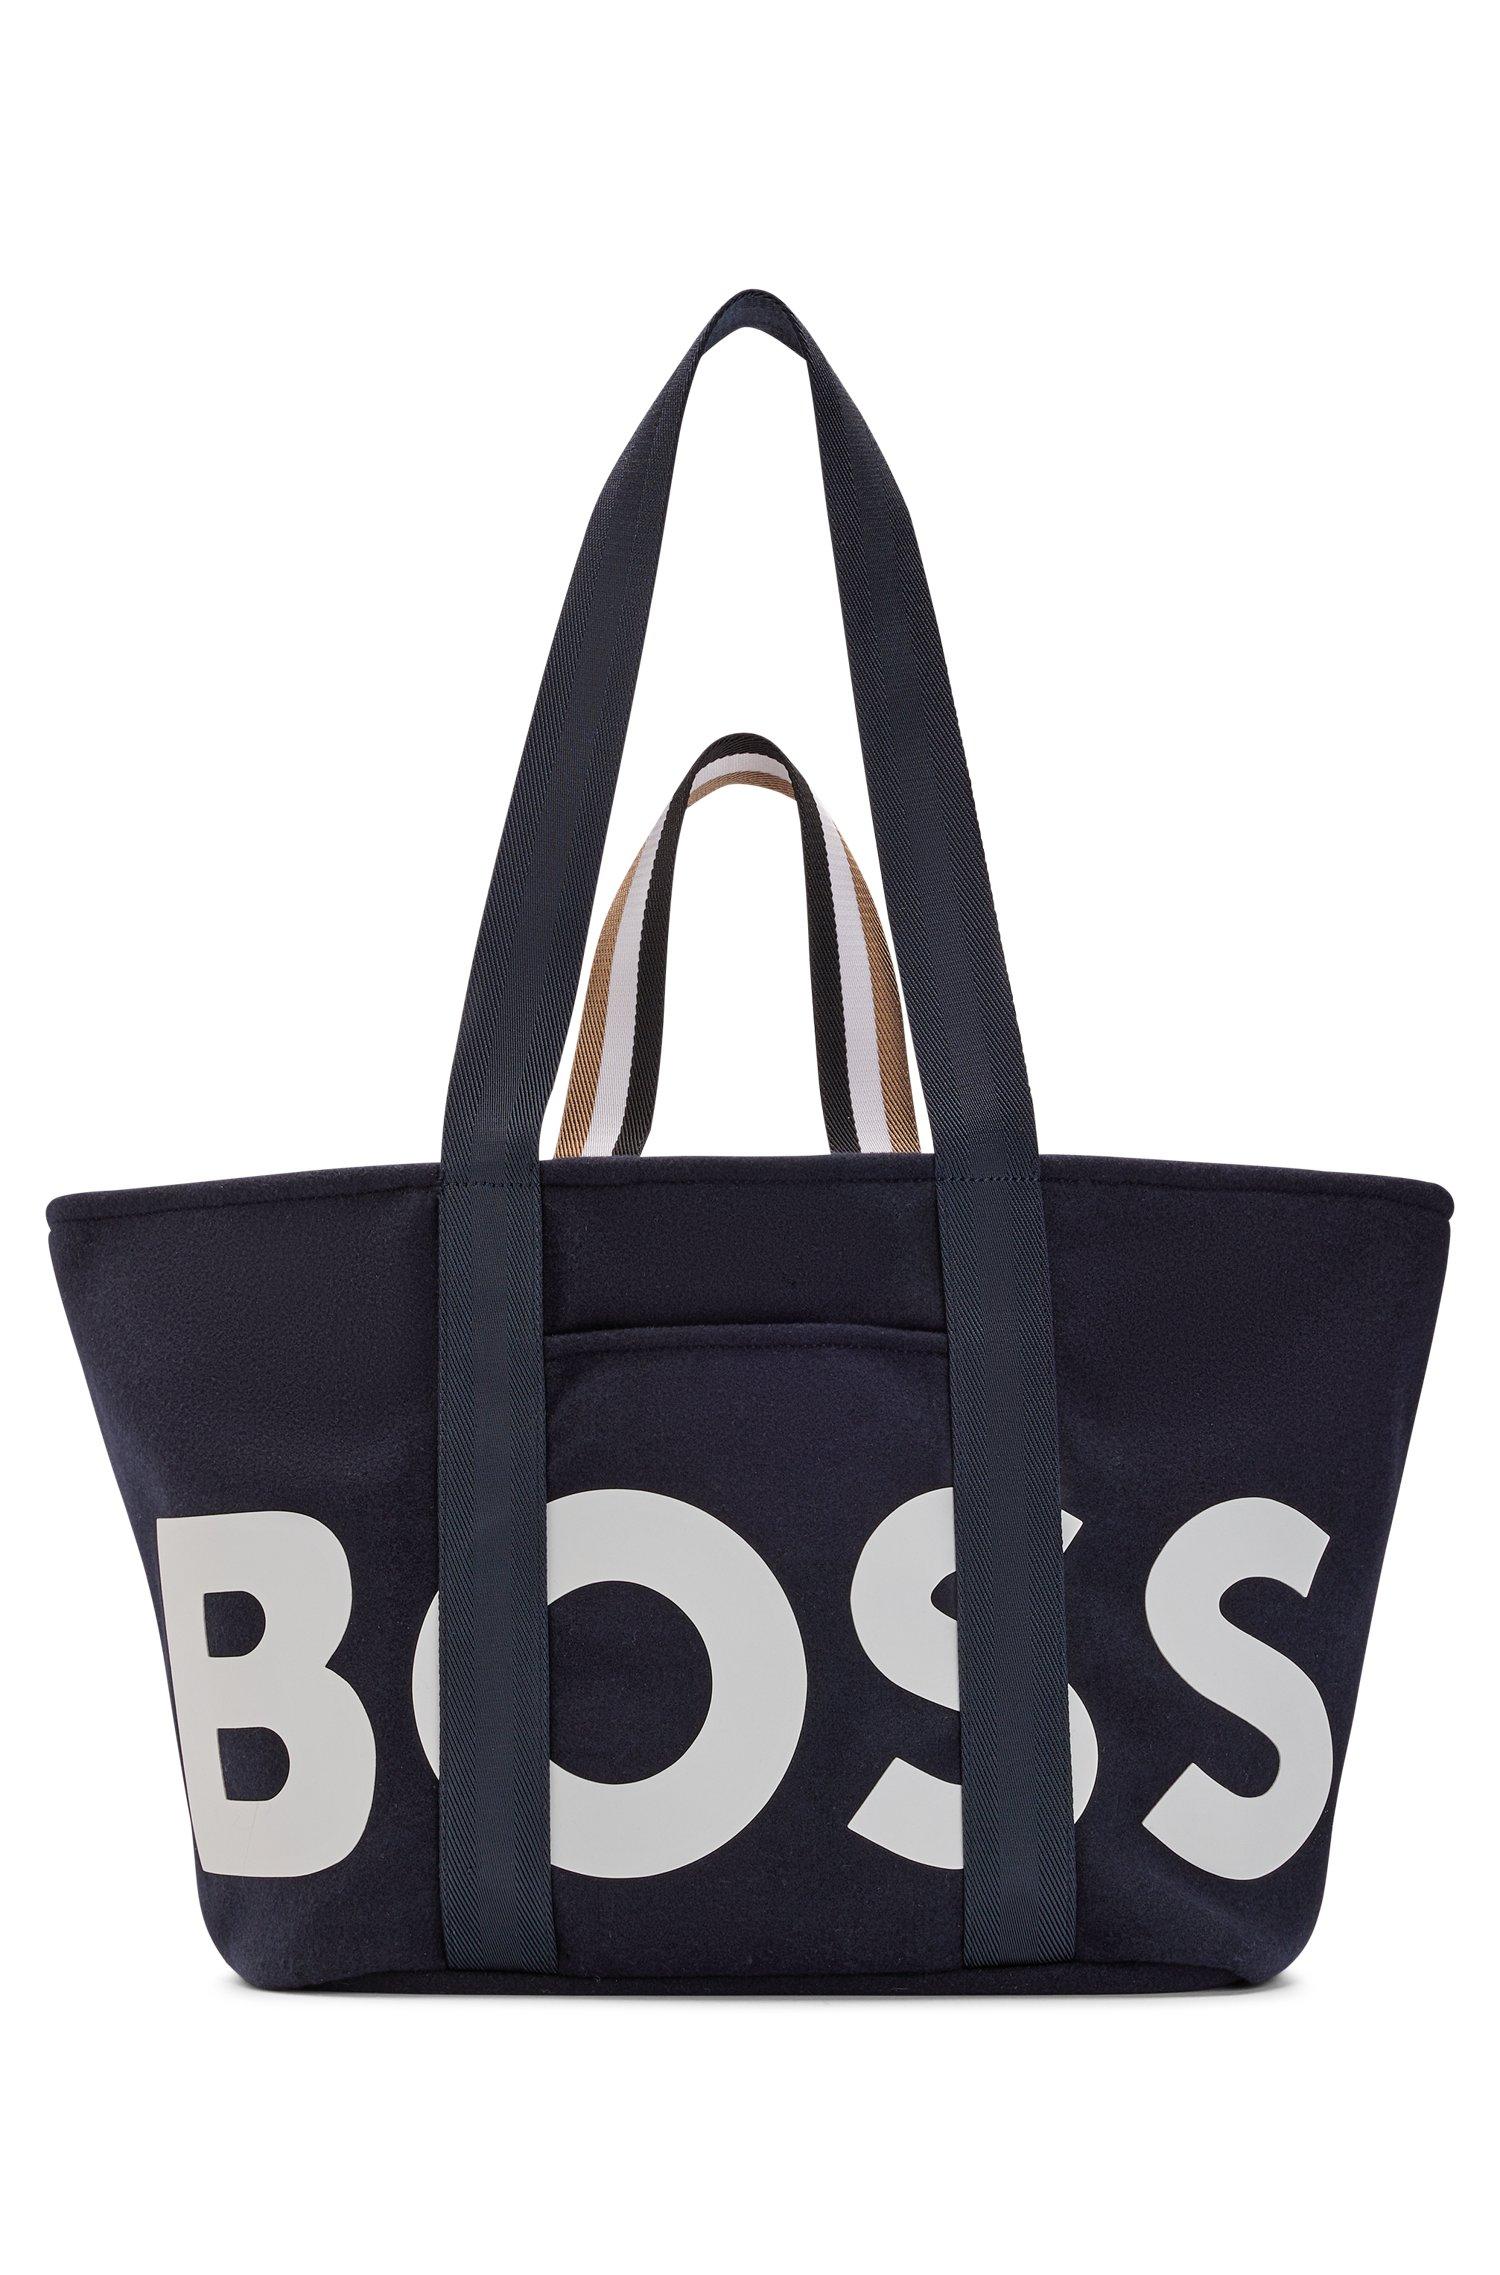 BOSS by HUGO BOSS Tote Bag In Recycled Fabric With Contrast Logo in ...